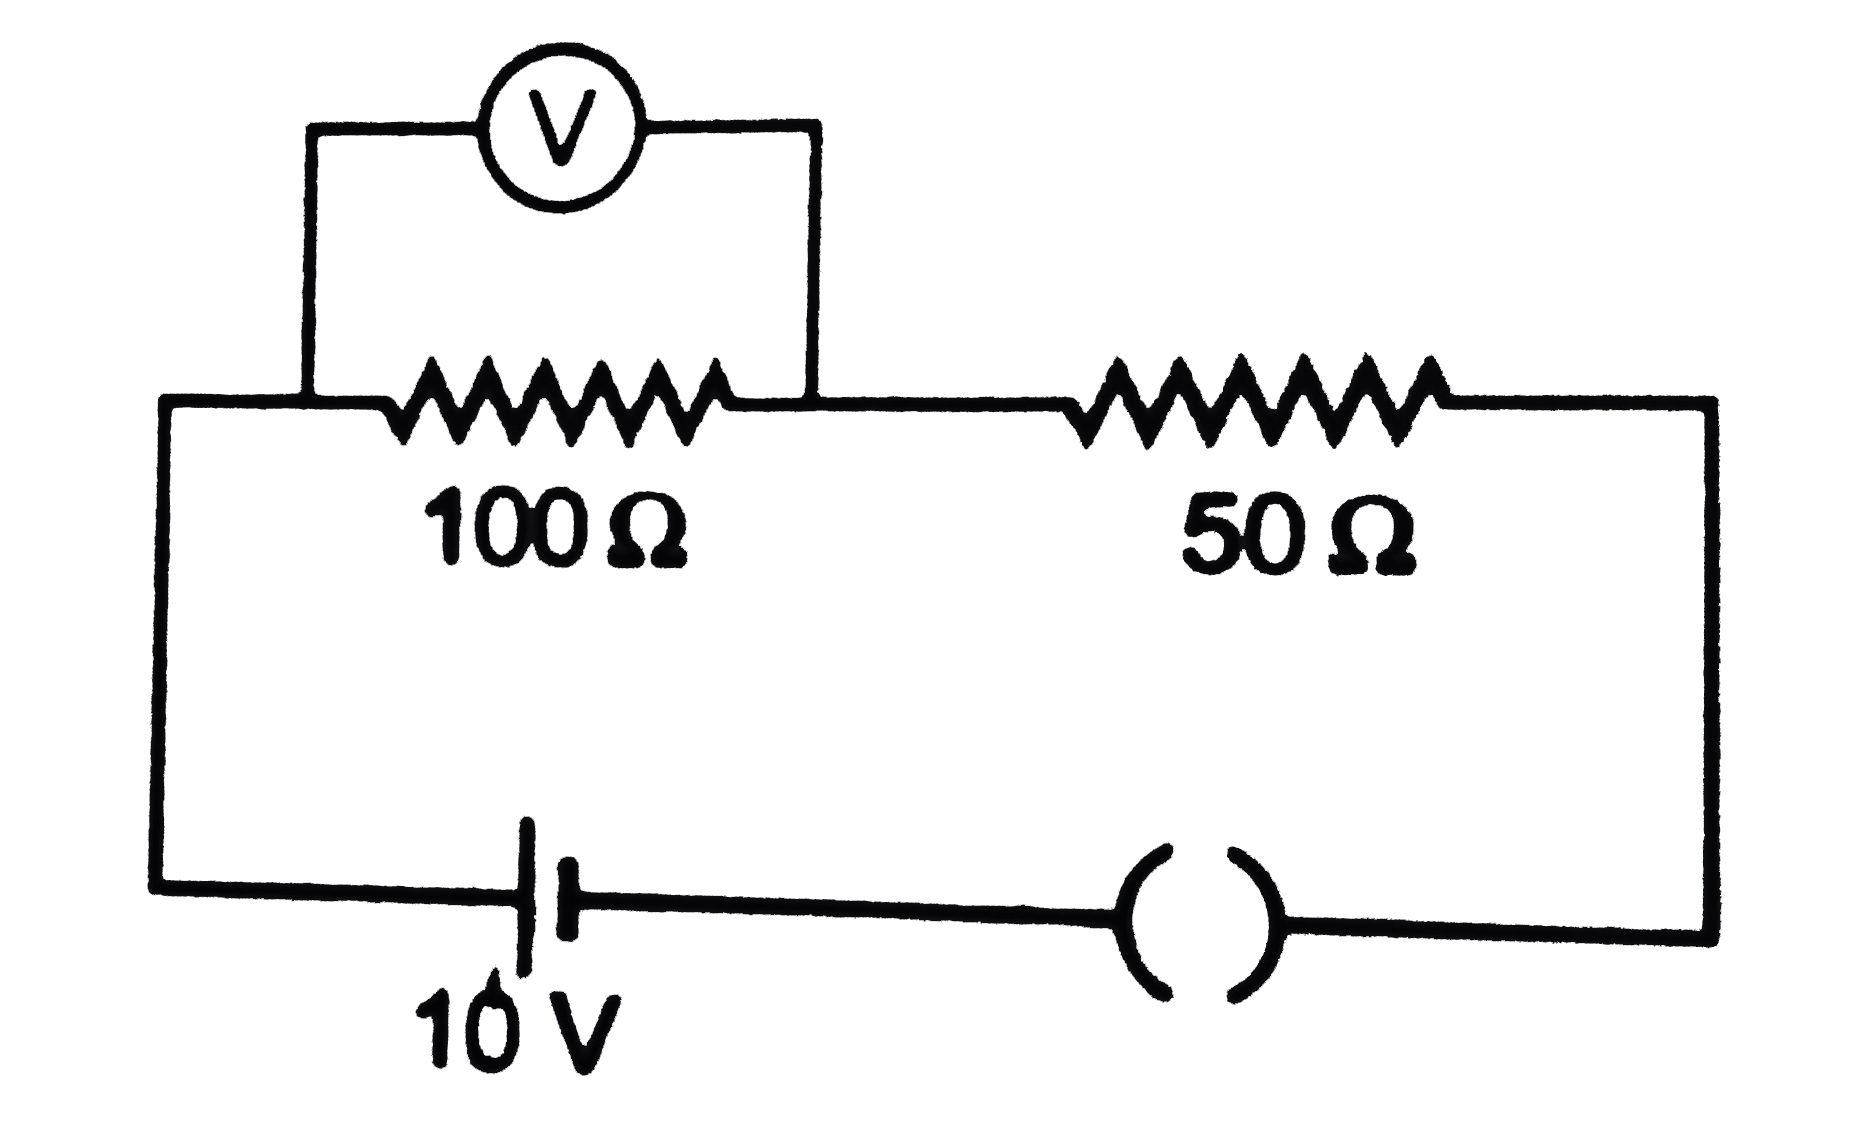 In the given circuit, the voltmeter records 5 volt. The resistance of the voltmeter in Omega is